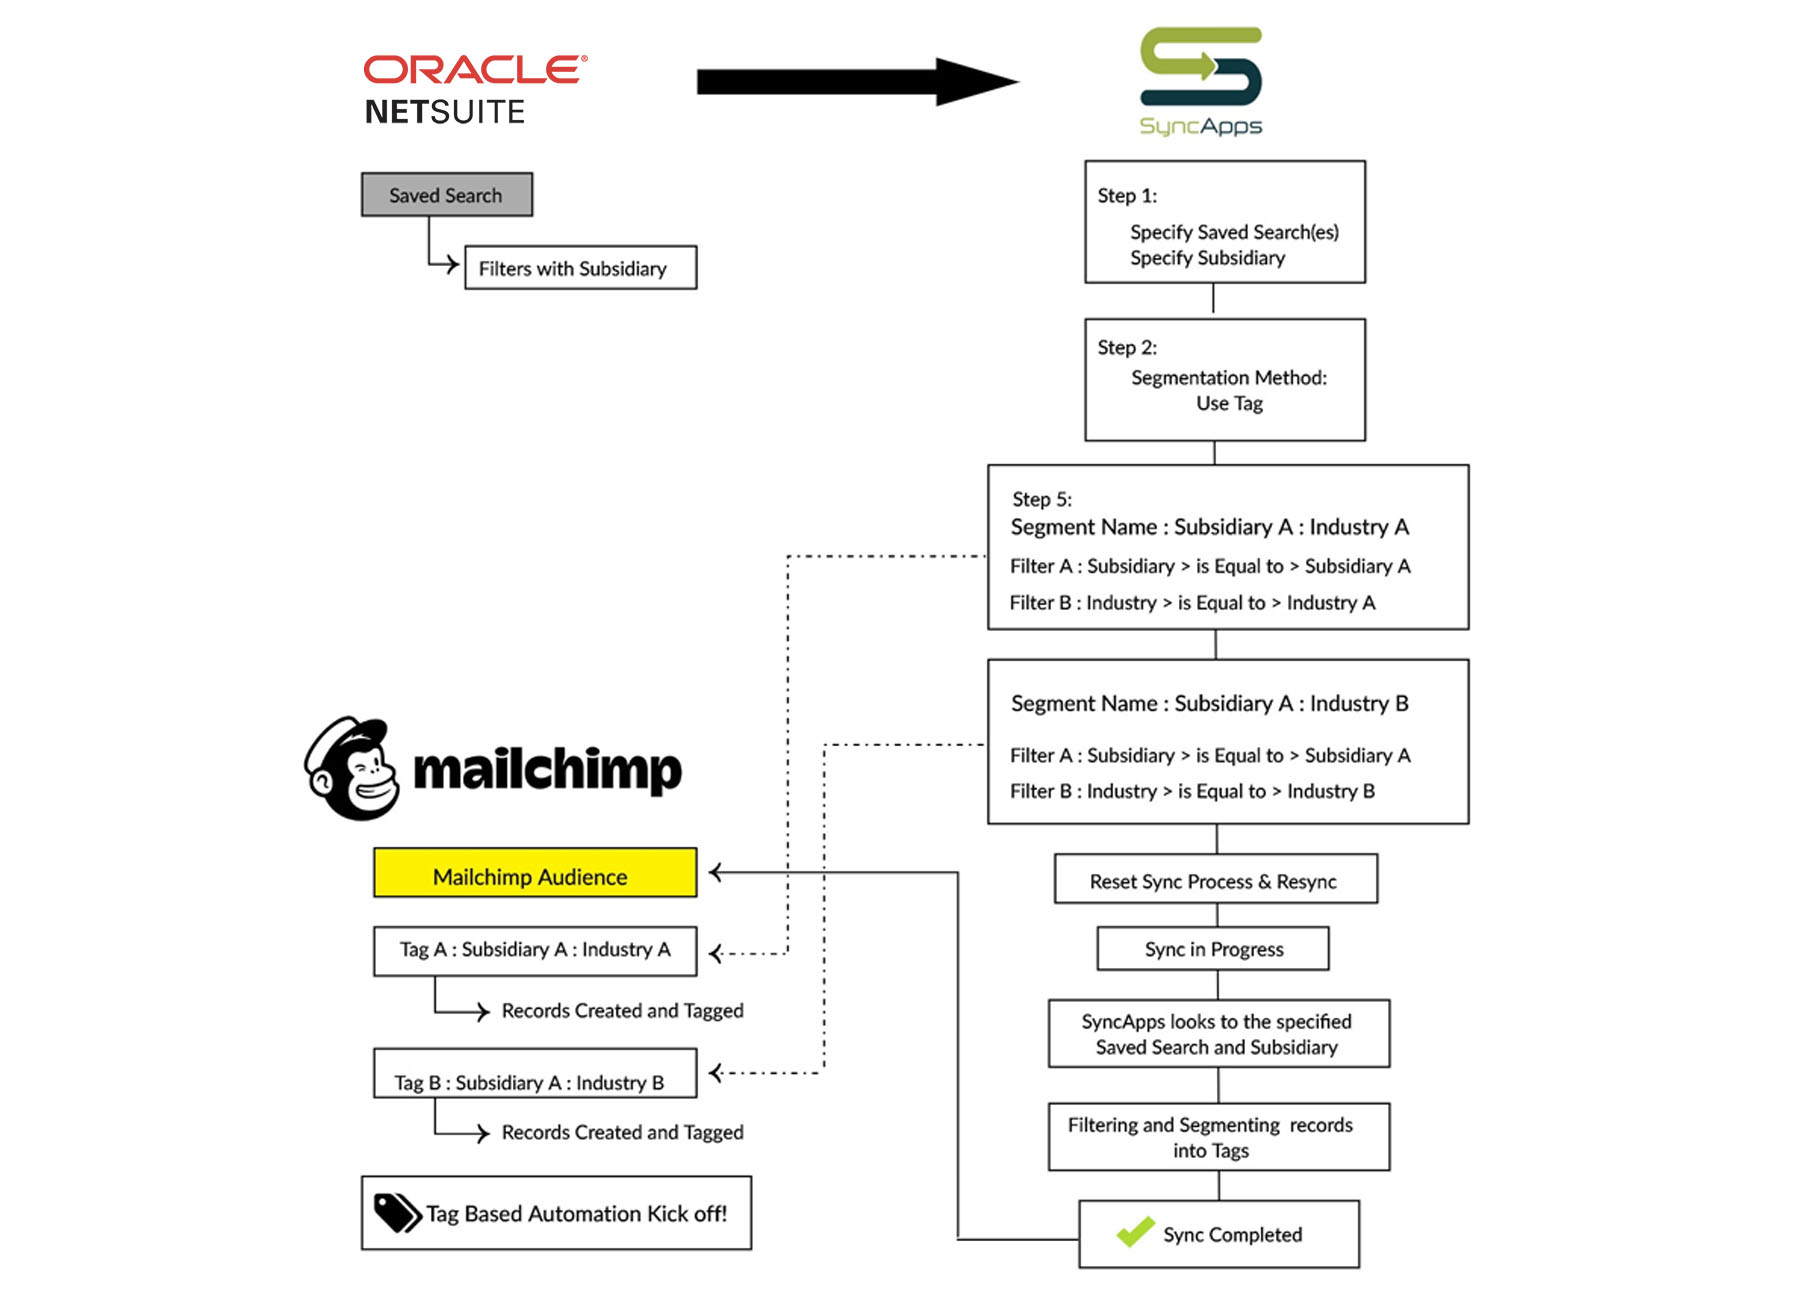 Flowhchart for NetSuite to Mailchimp